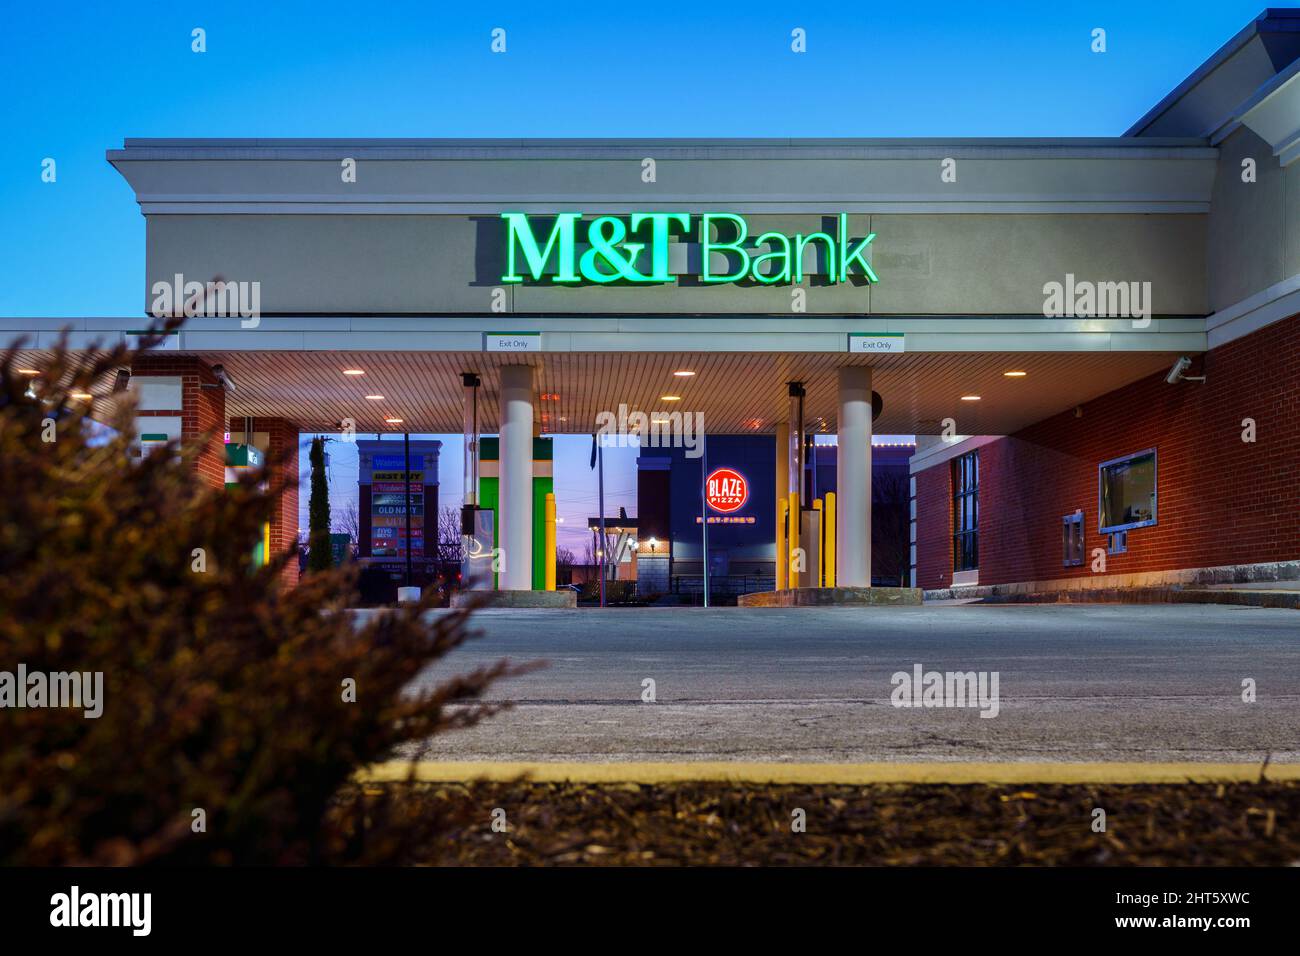 New Hartford, New York - Feb 24, 2022: Closeup View of M&T Bank Building Drive Thru. M&T Bank Corporation is an American bank holding co. headquartere Stock Photo